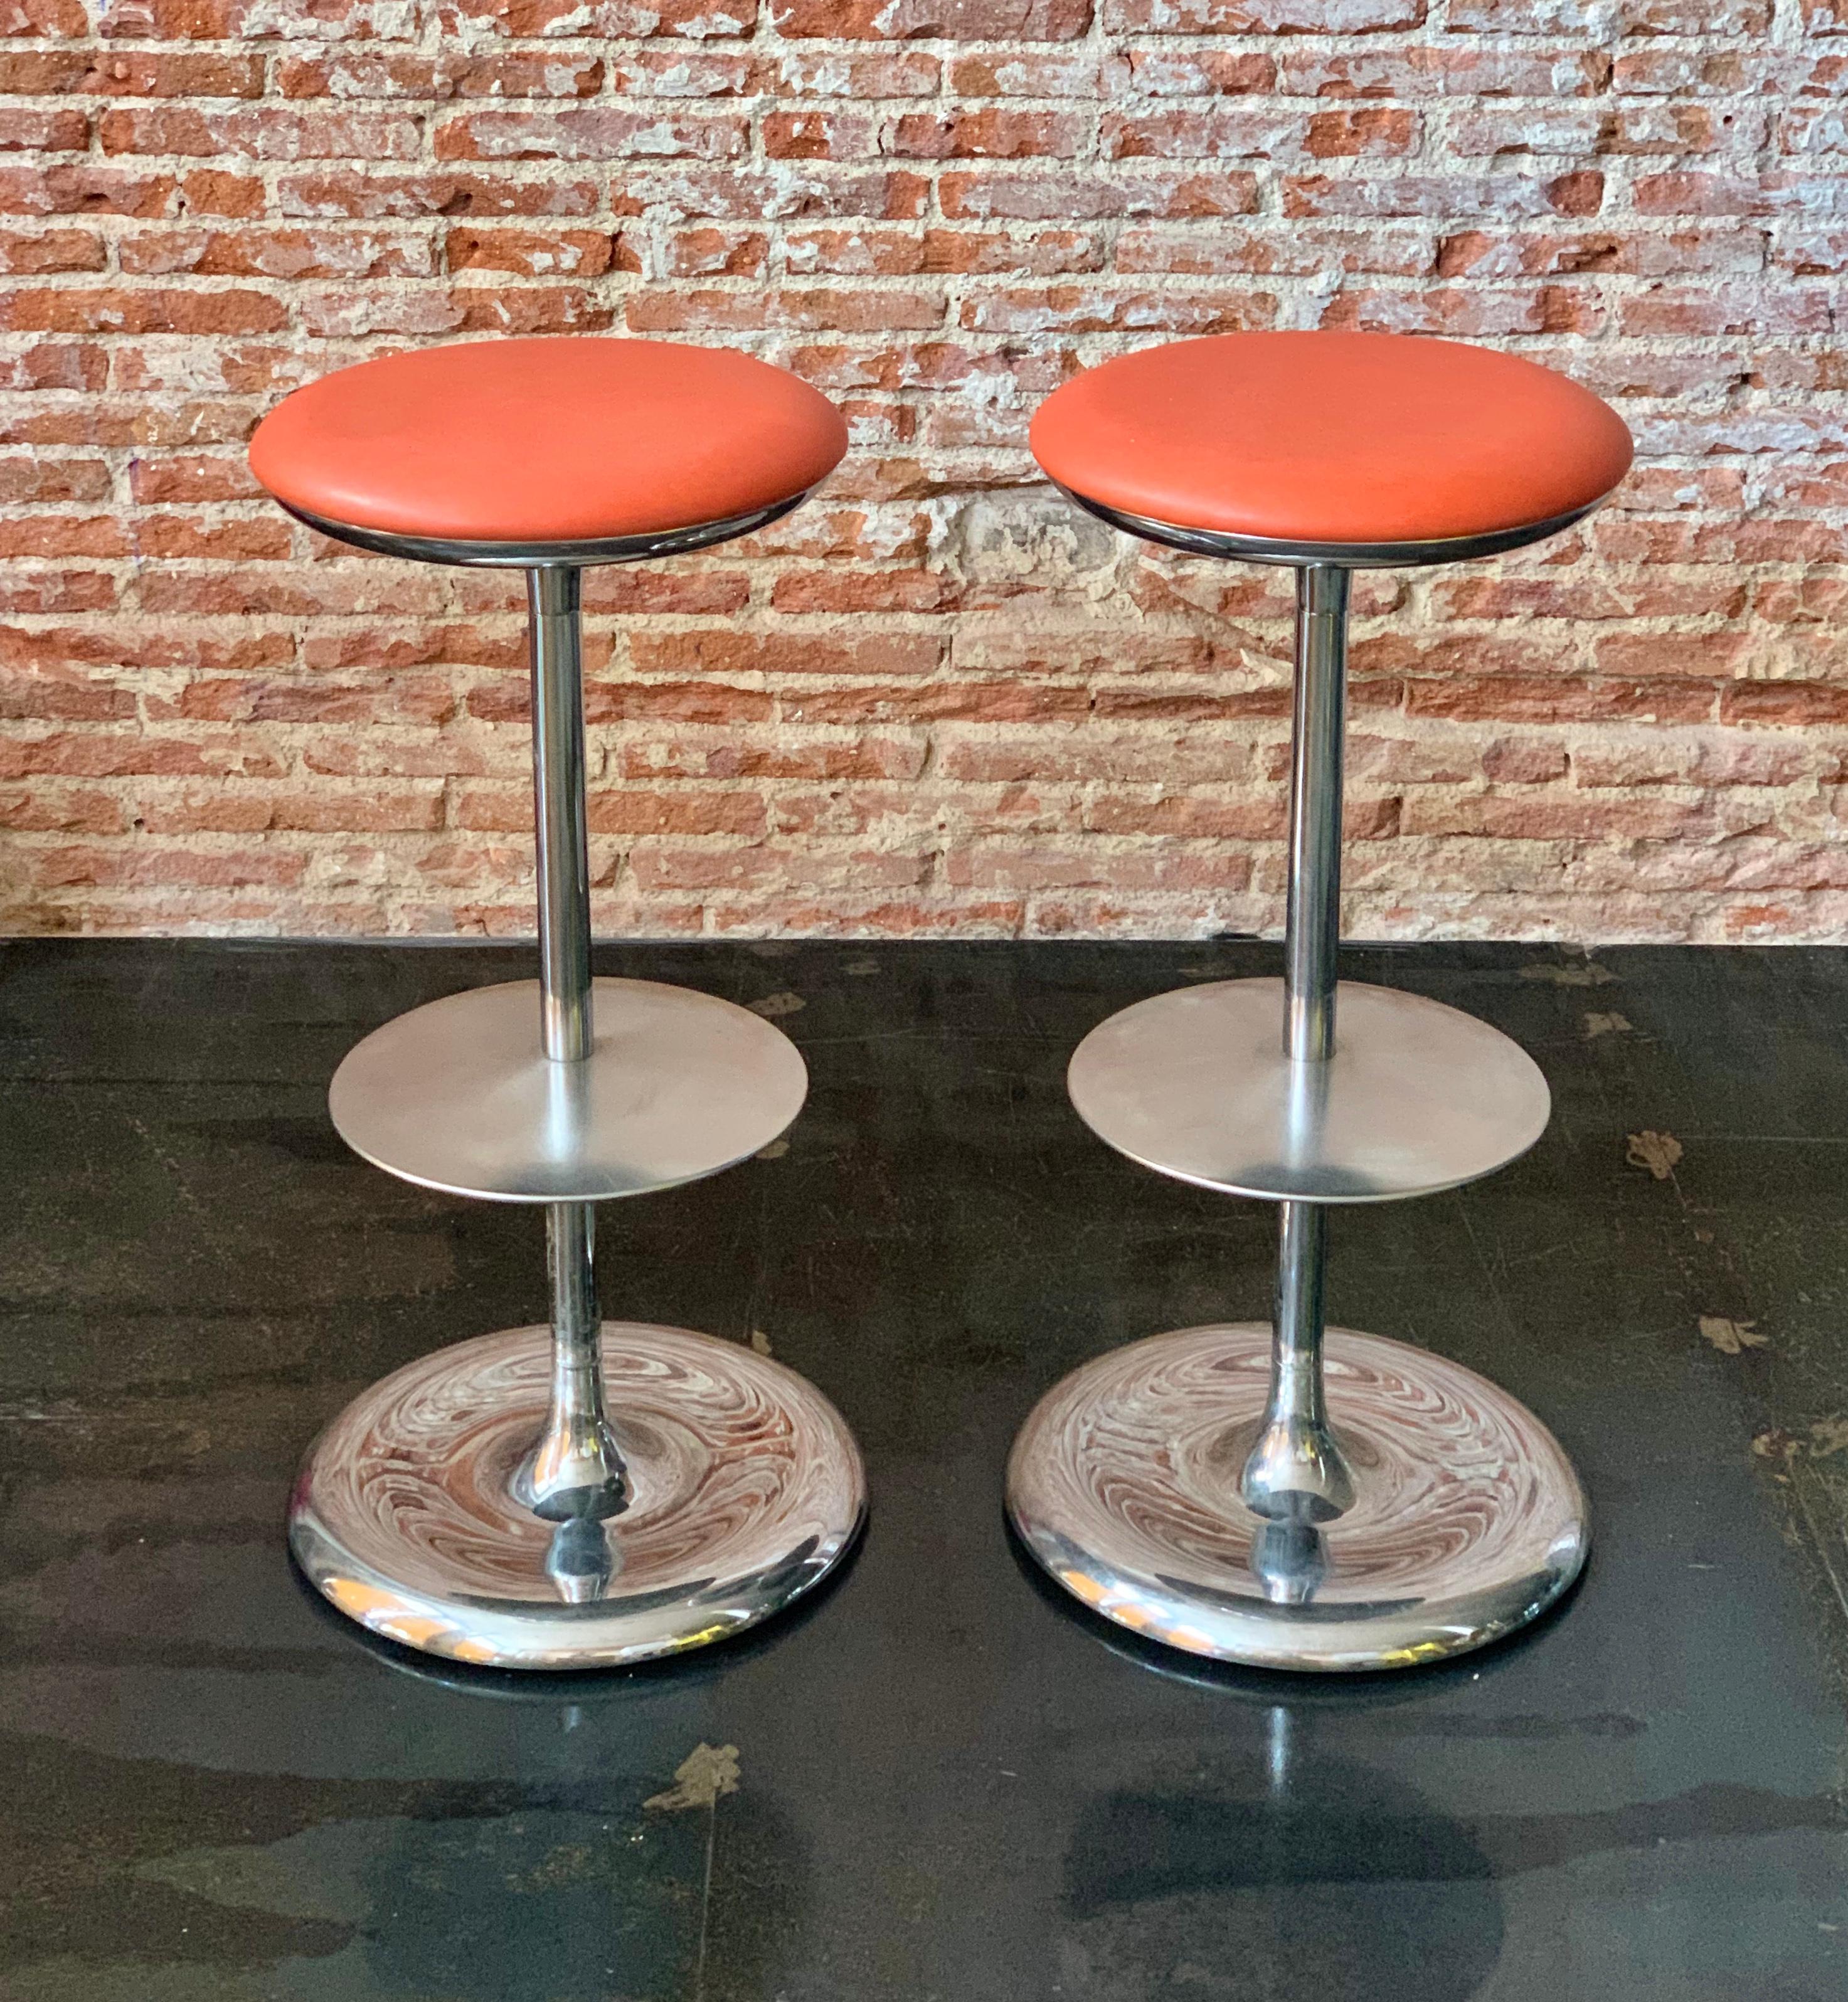 Set of two Italian Postmodern bar stools from late 20th century by Plank. Made in chromed stainless steel and orange leather seats.
Labeled and numbered by the maker.